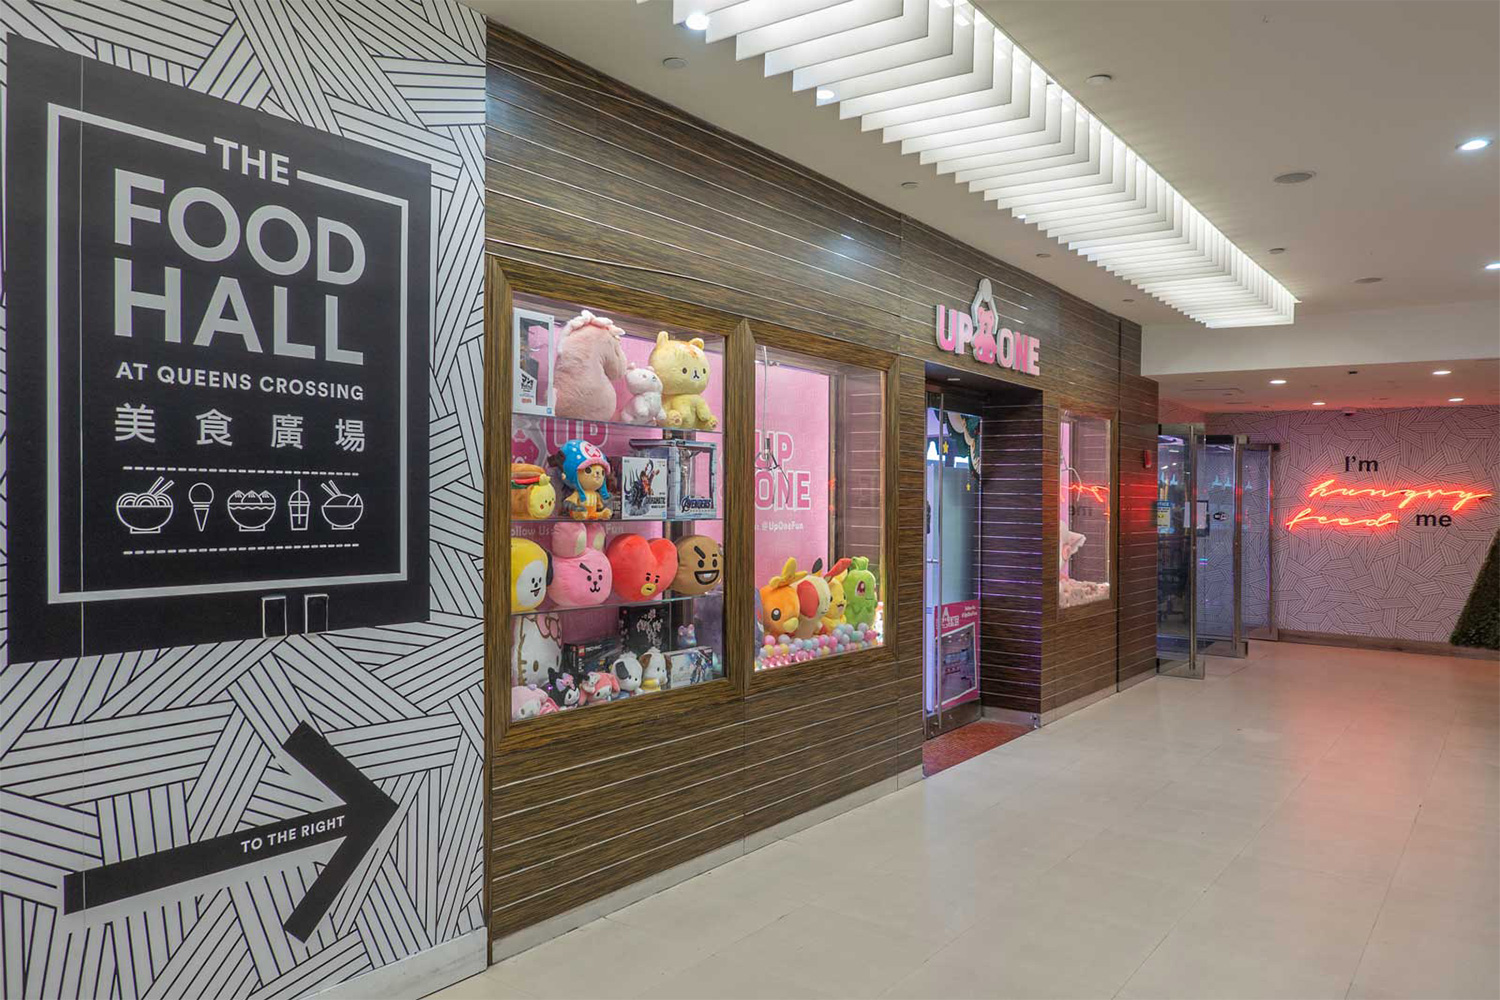 The Food Hall at Queens Crossing